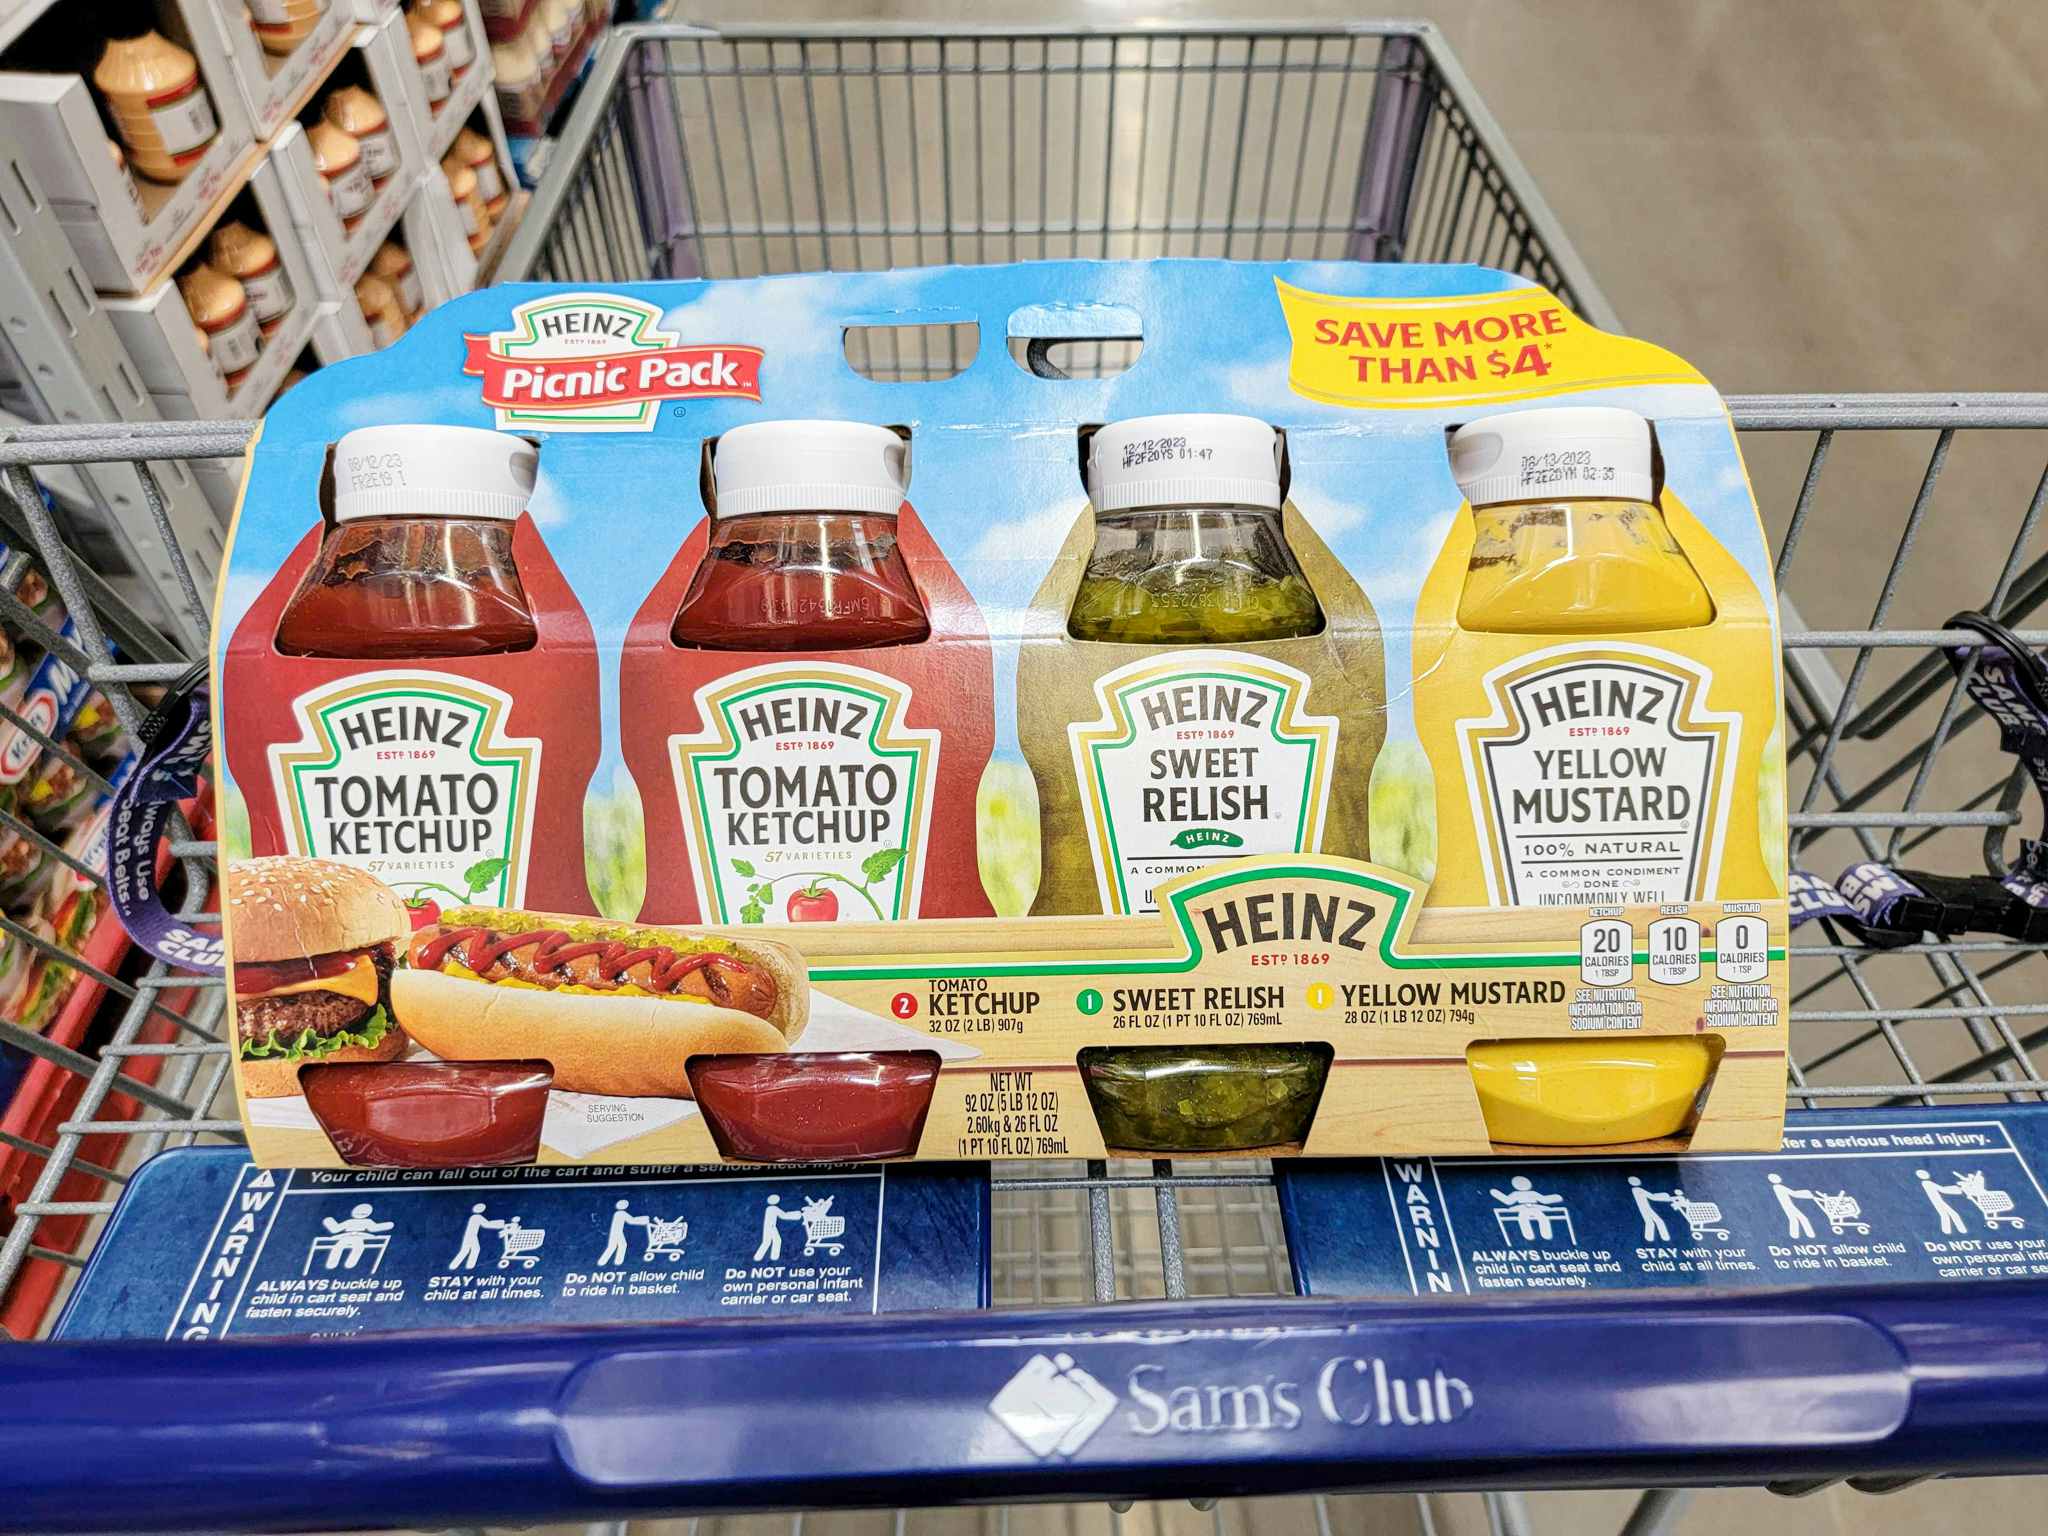 a pack of heinz condiments in a cart, with 2 bottles of ketchup, 1 relish, and 1 mustard